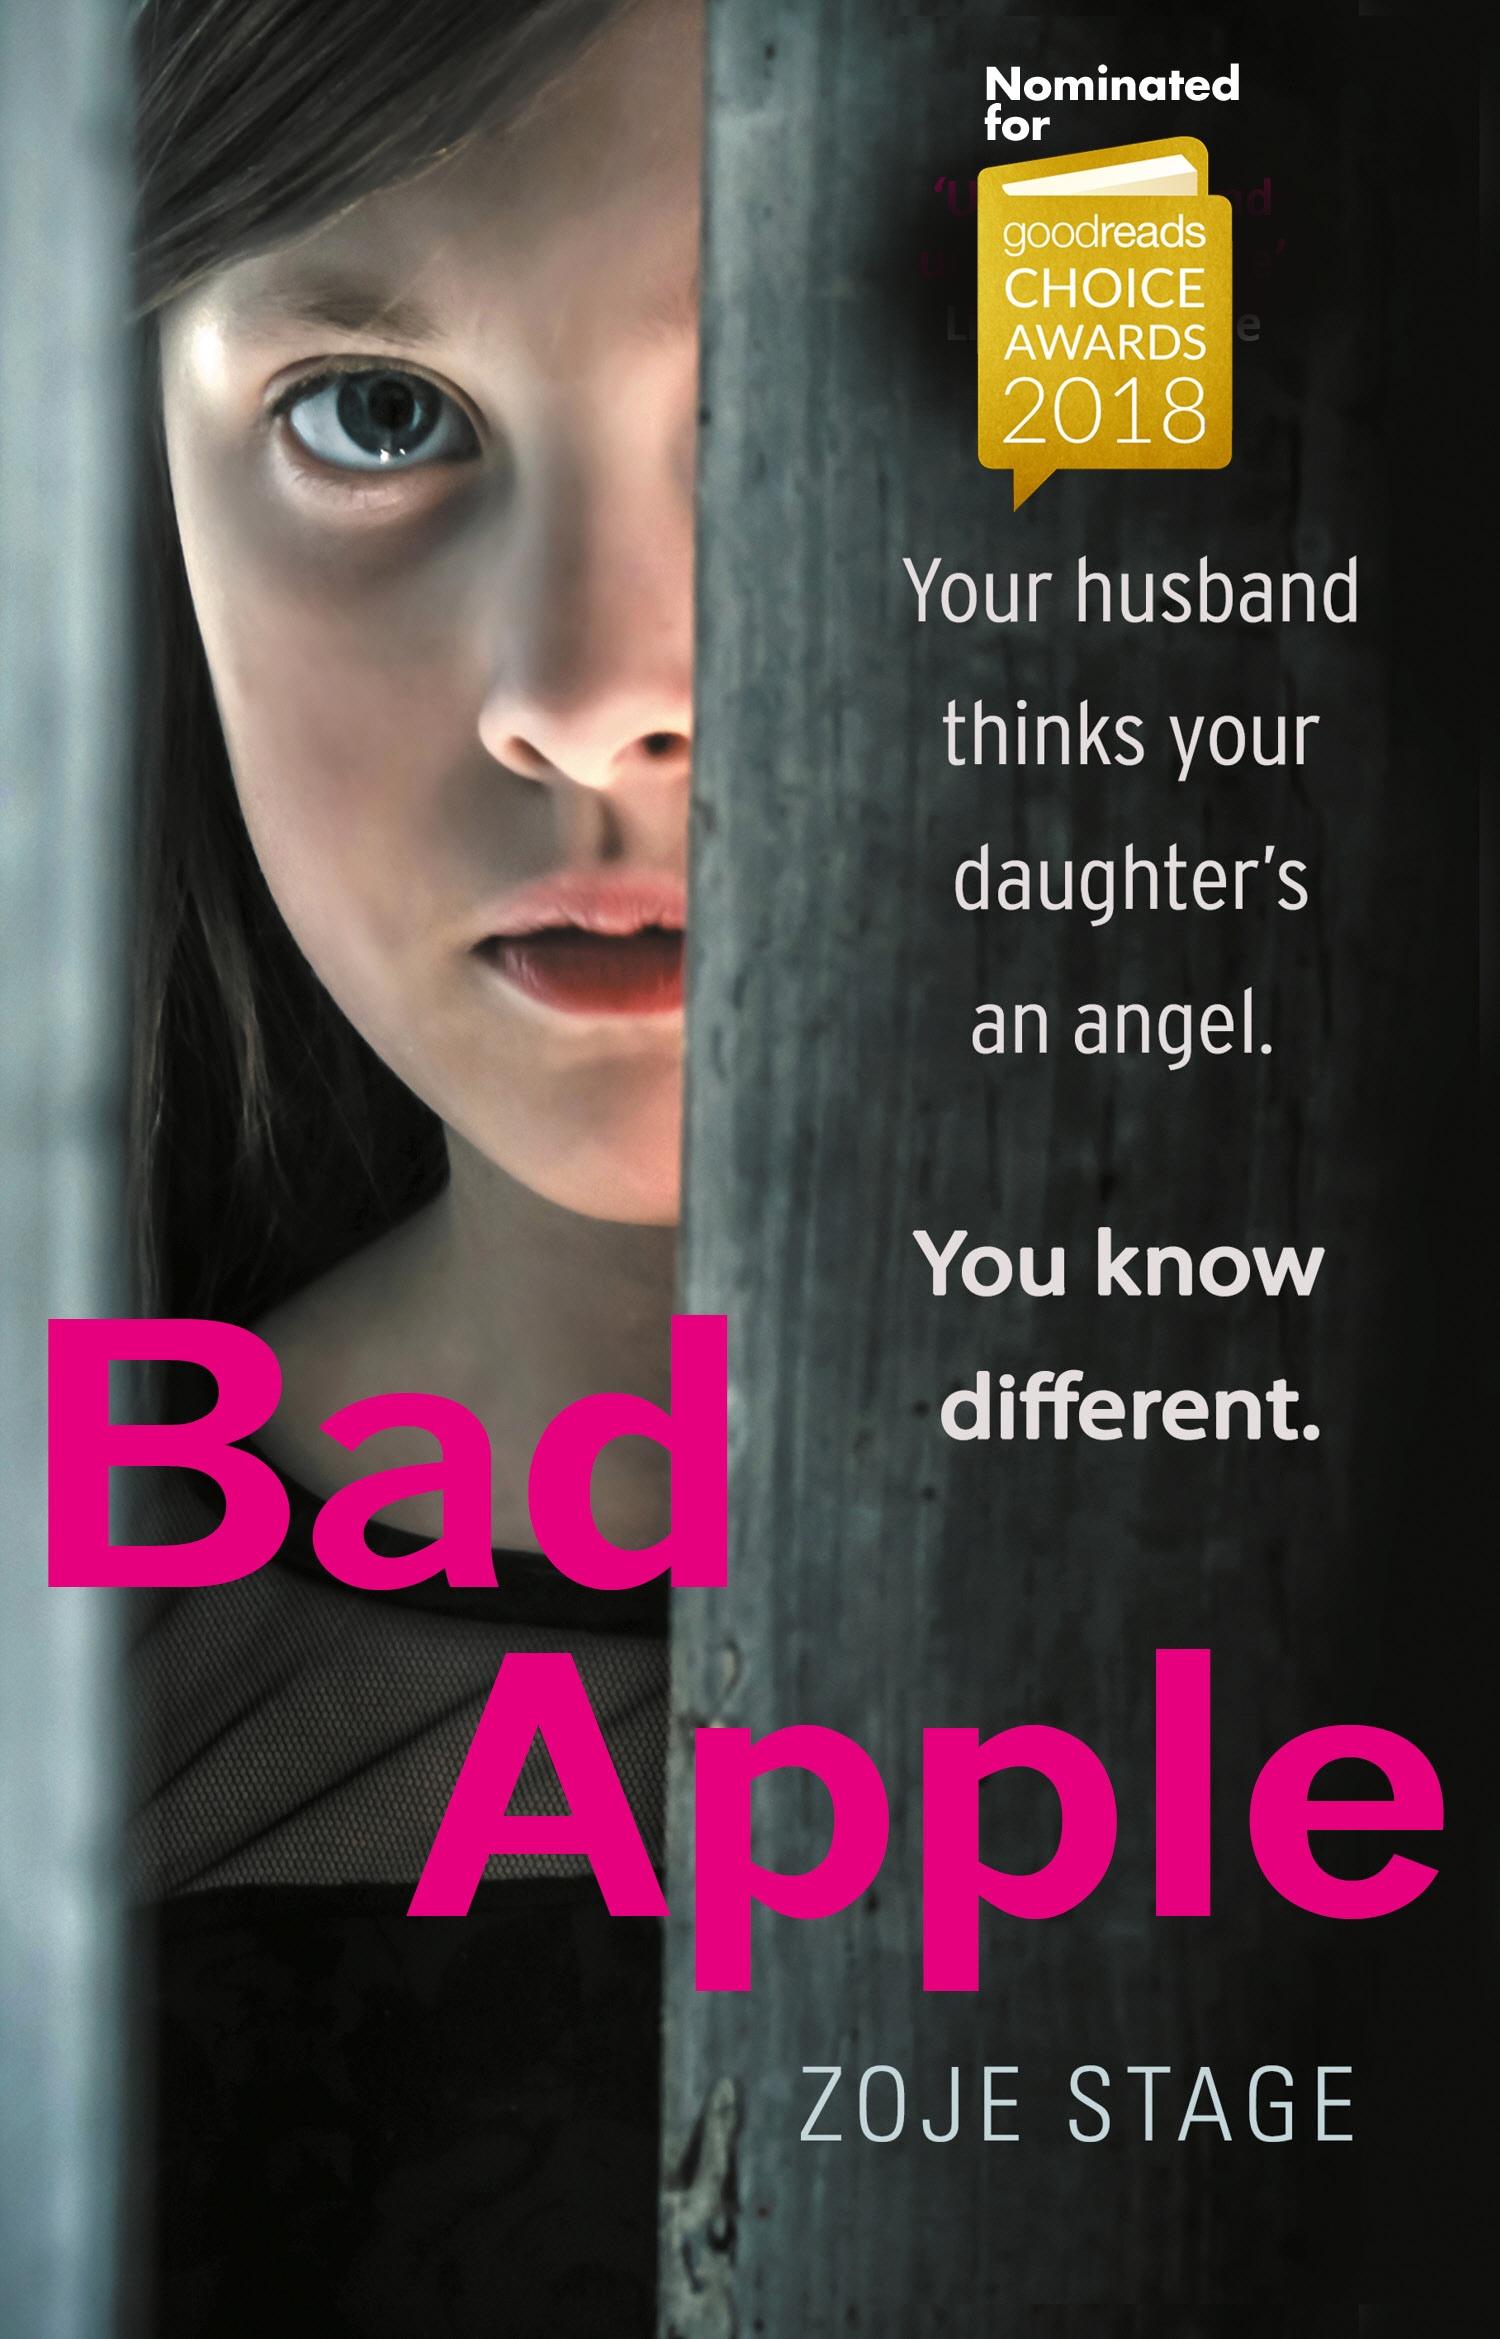 Book “Bad Apple” by Zoje Stage — January 24, 2019